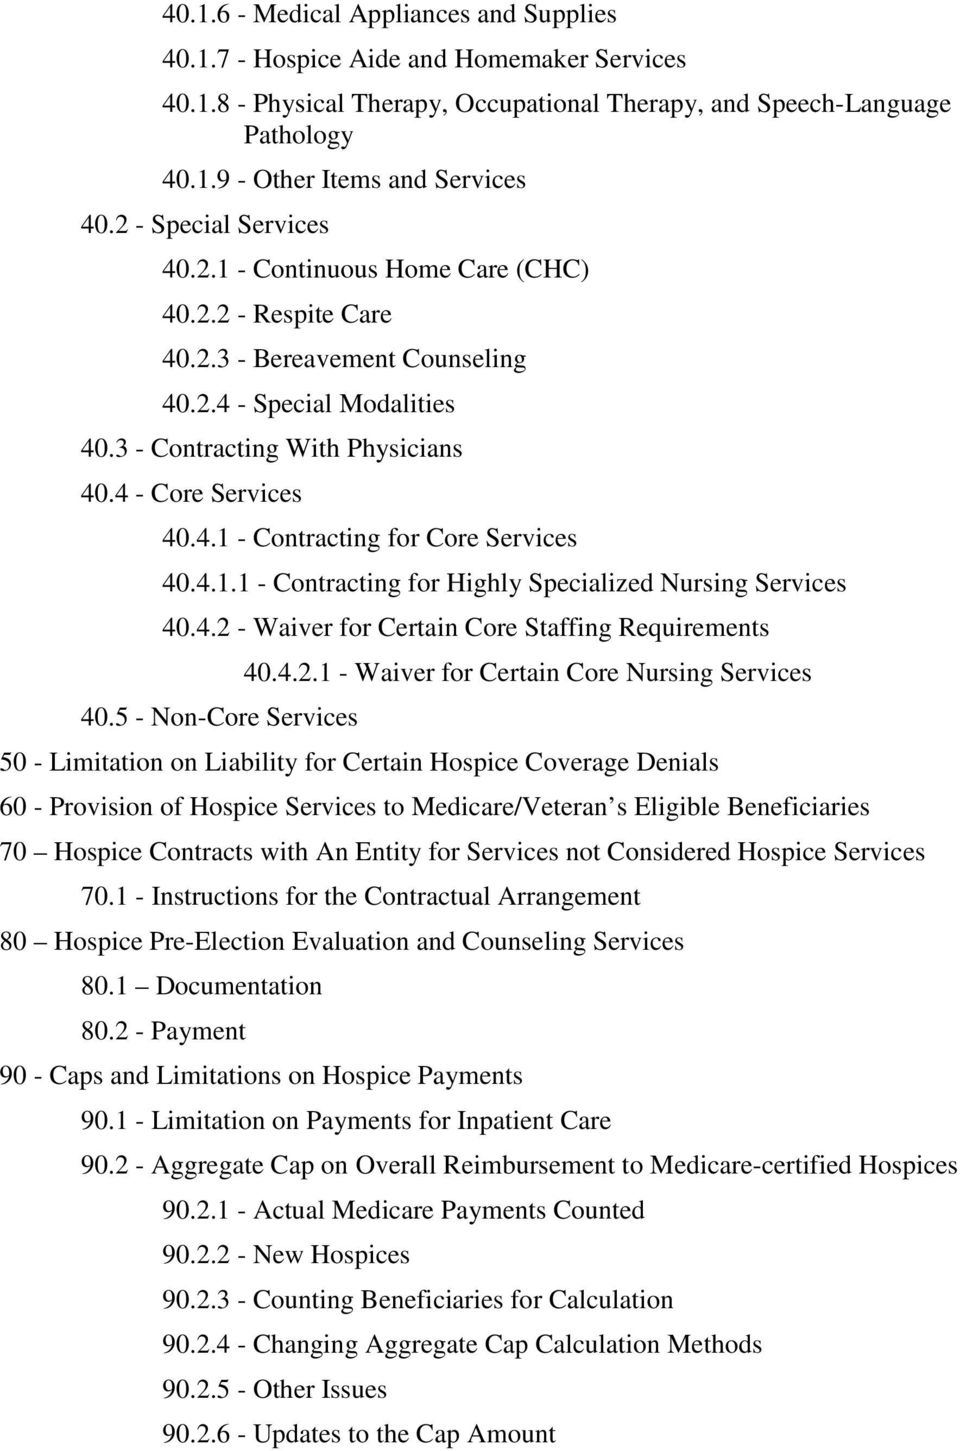 4.1.1 - Contracting for Highly Specialized Nursing Services 40.4.2 